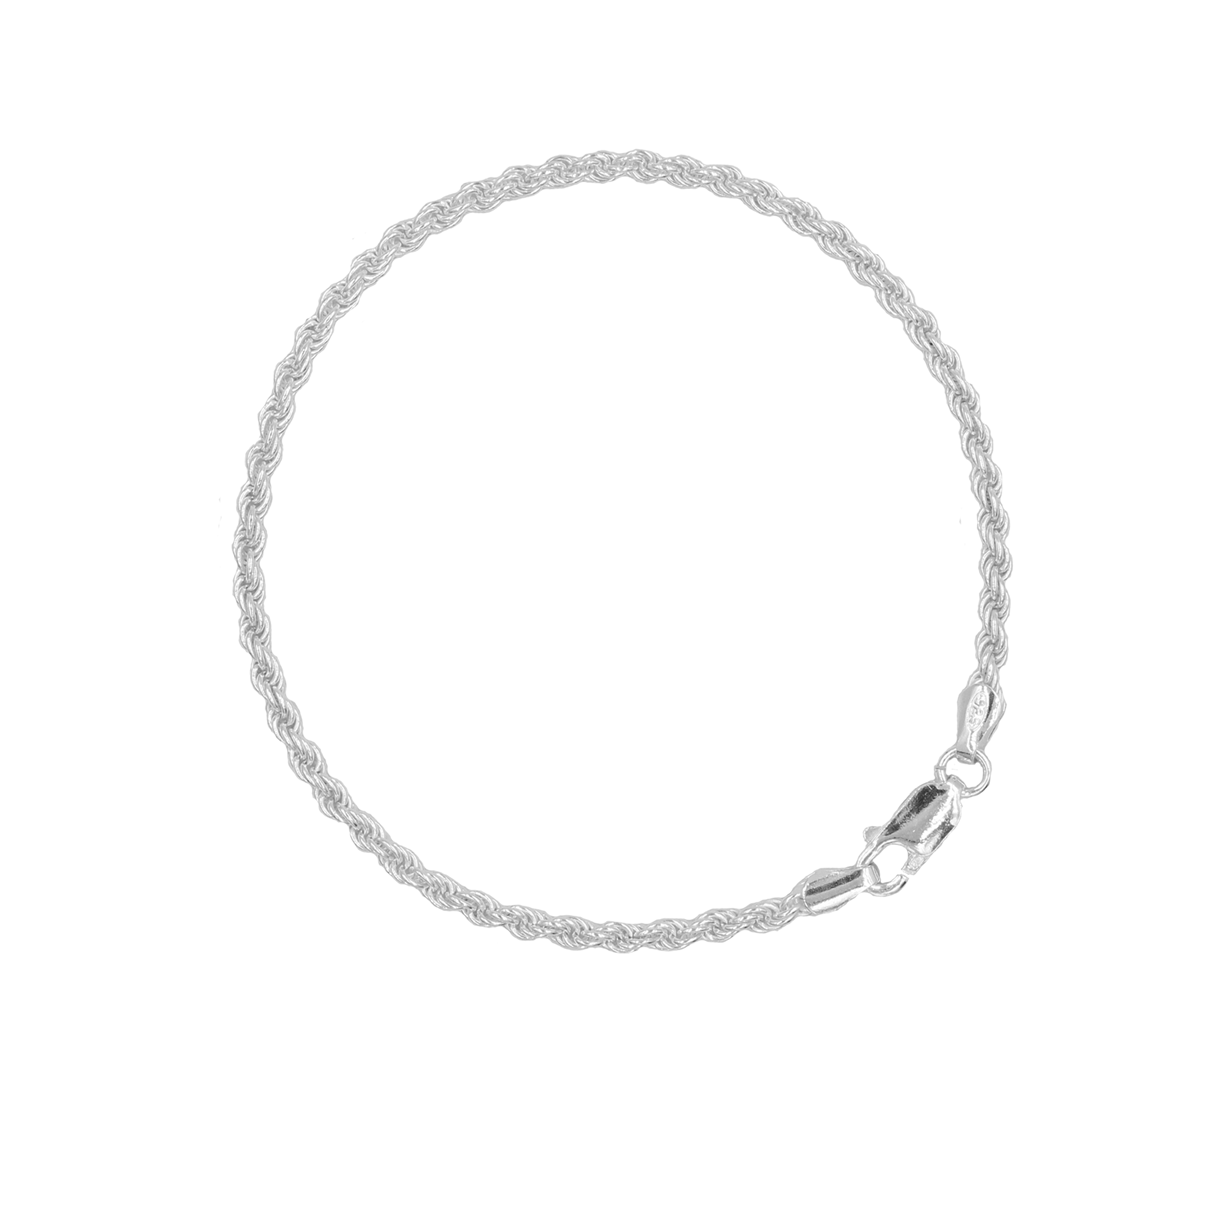 Rope Chain Bracelet Sterling Silver 